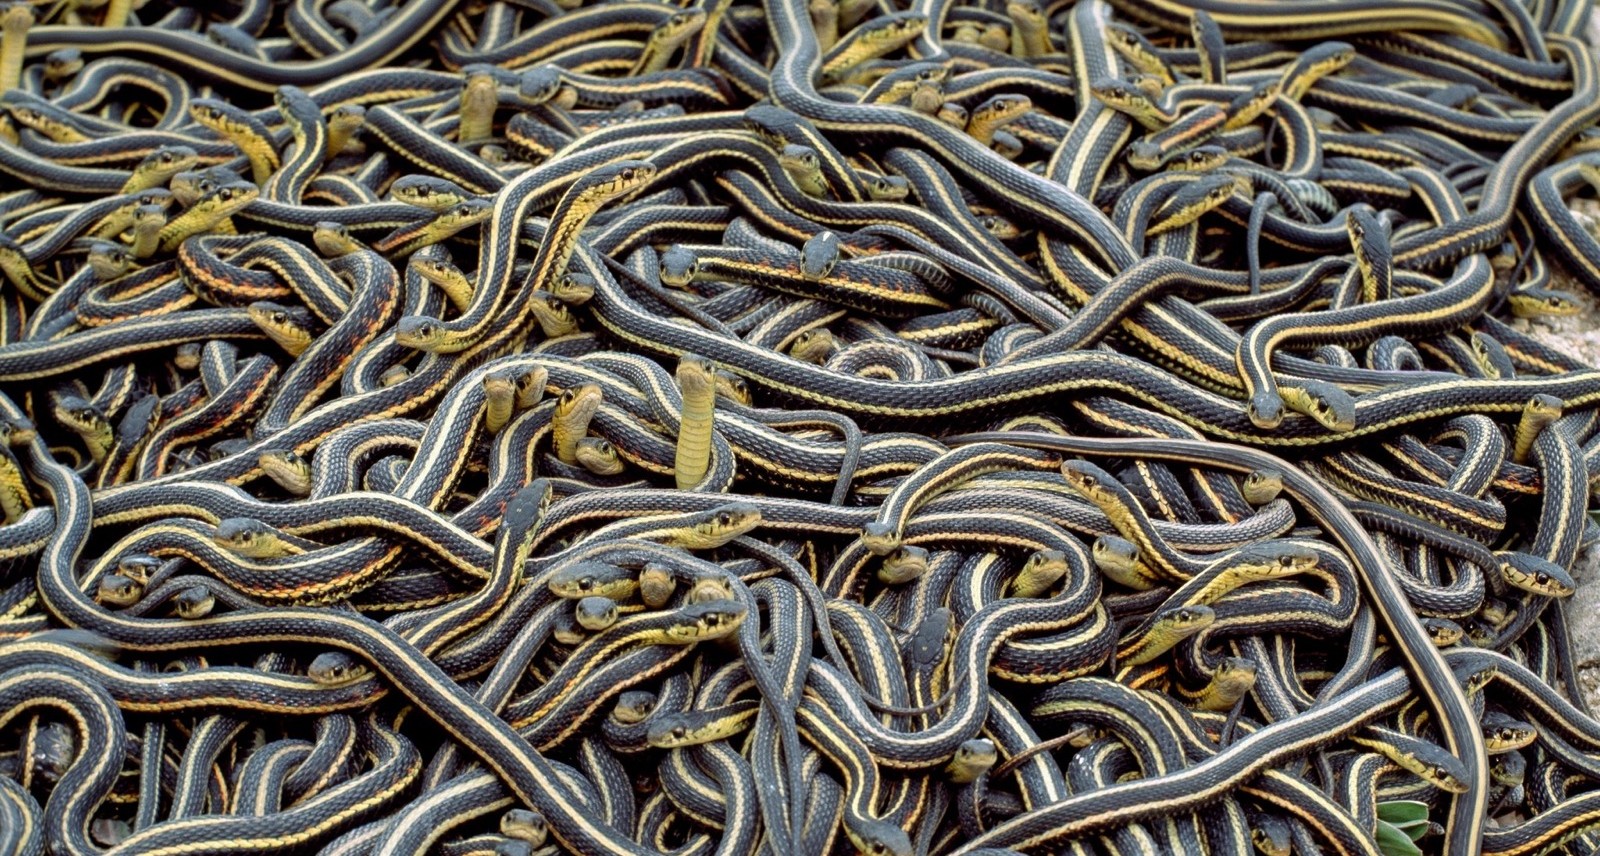 North of Winnipeg, 75,000 Snakes Just Woke Up and Started Going to Town on Each Other